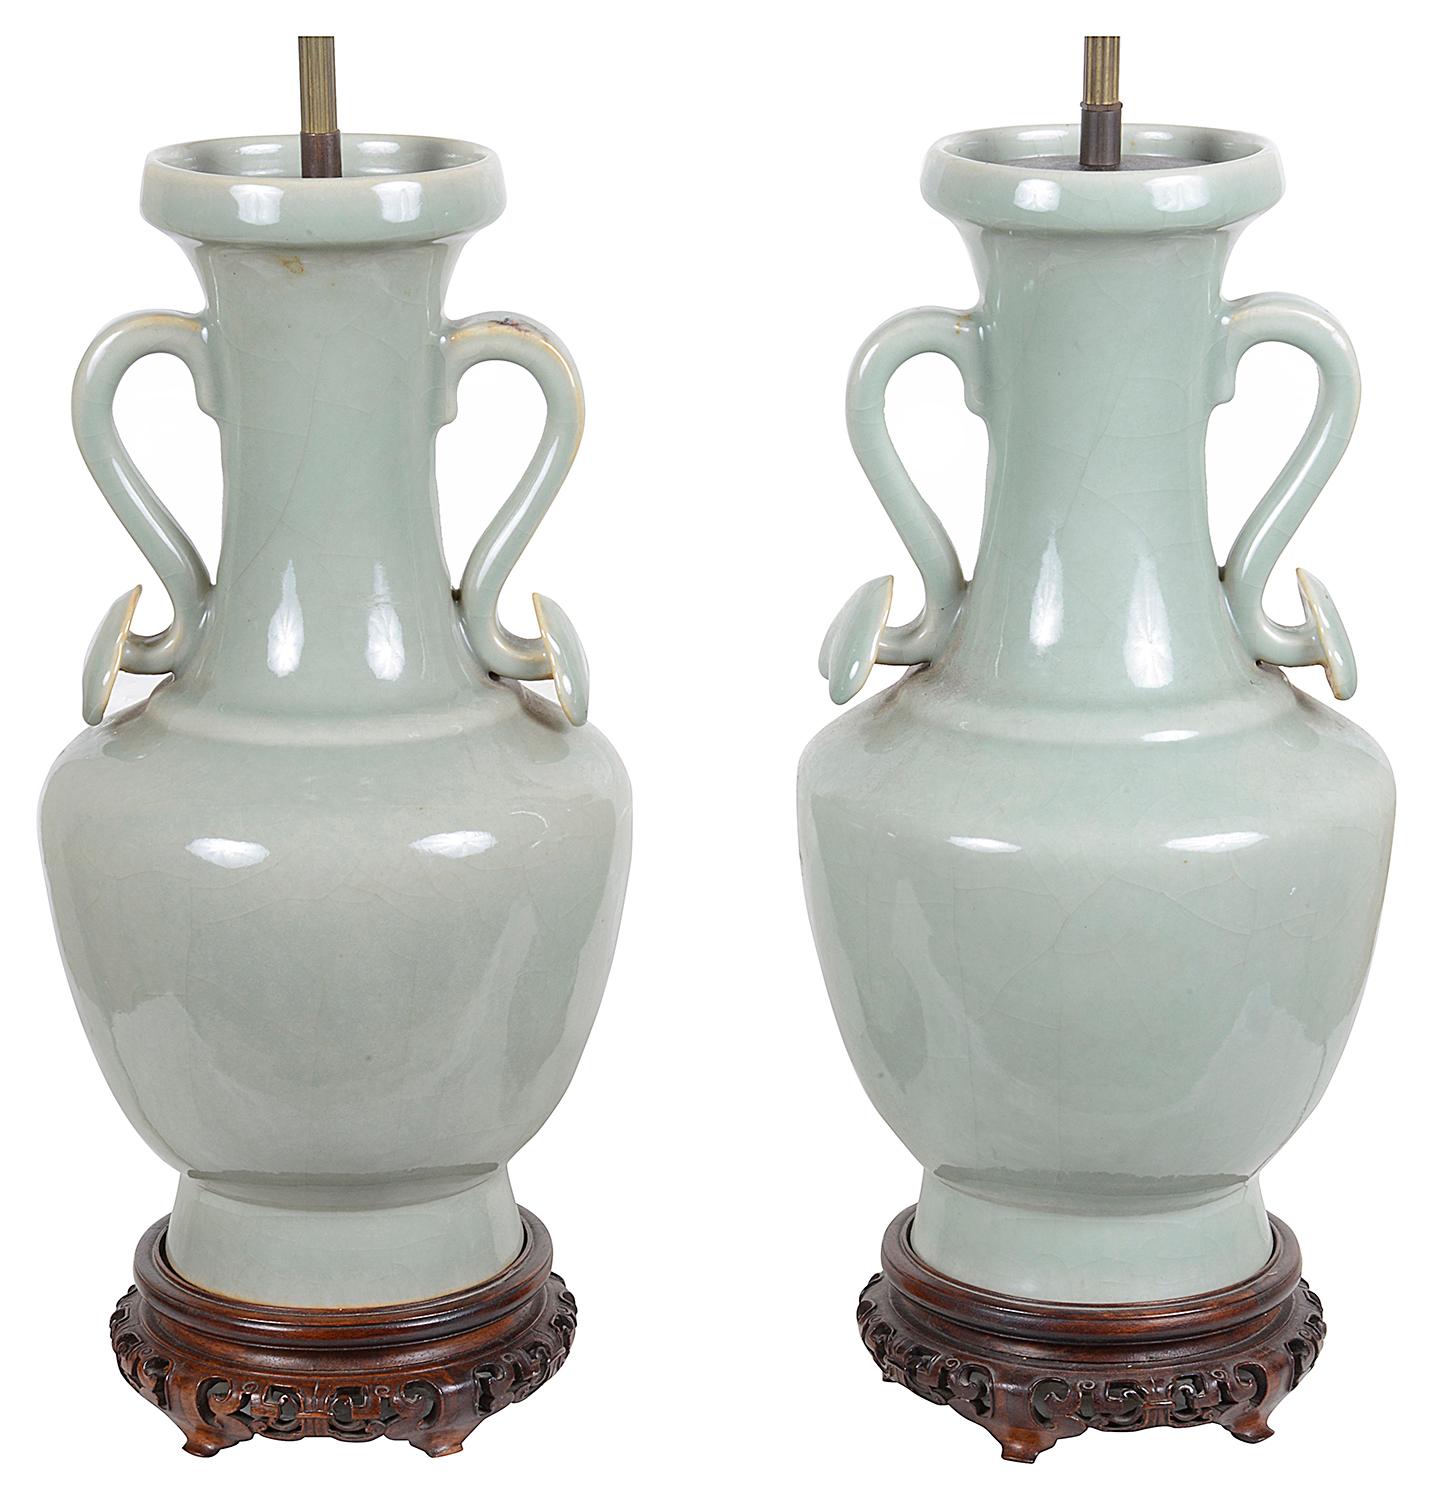 A very decorative pair of 18th century style Chinese Celadon porcelain two handled vases / lamps, raised on carved pierced hardwood stands, circa 1920.